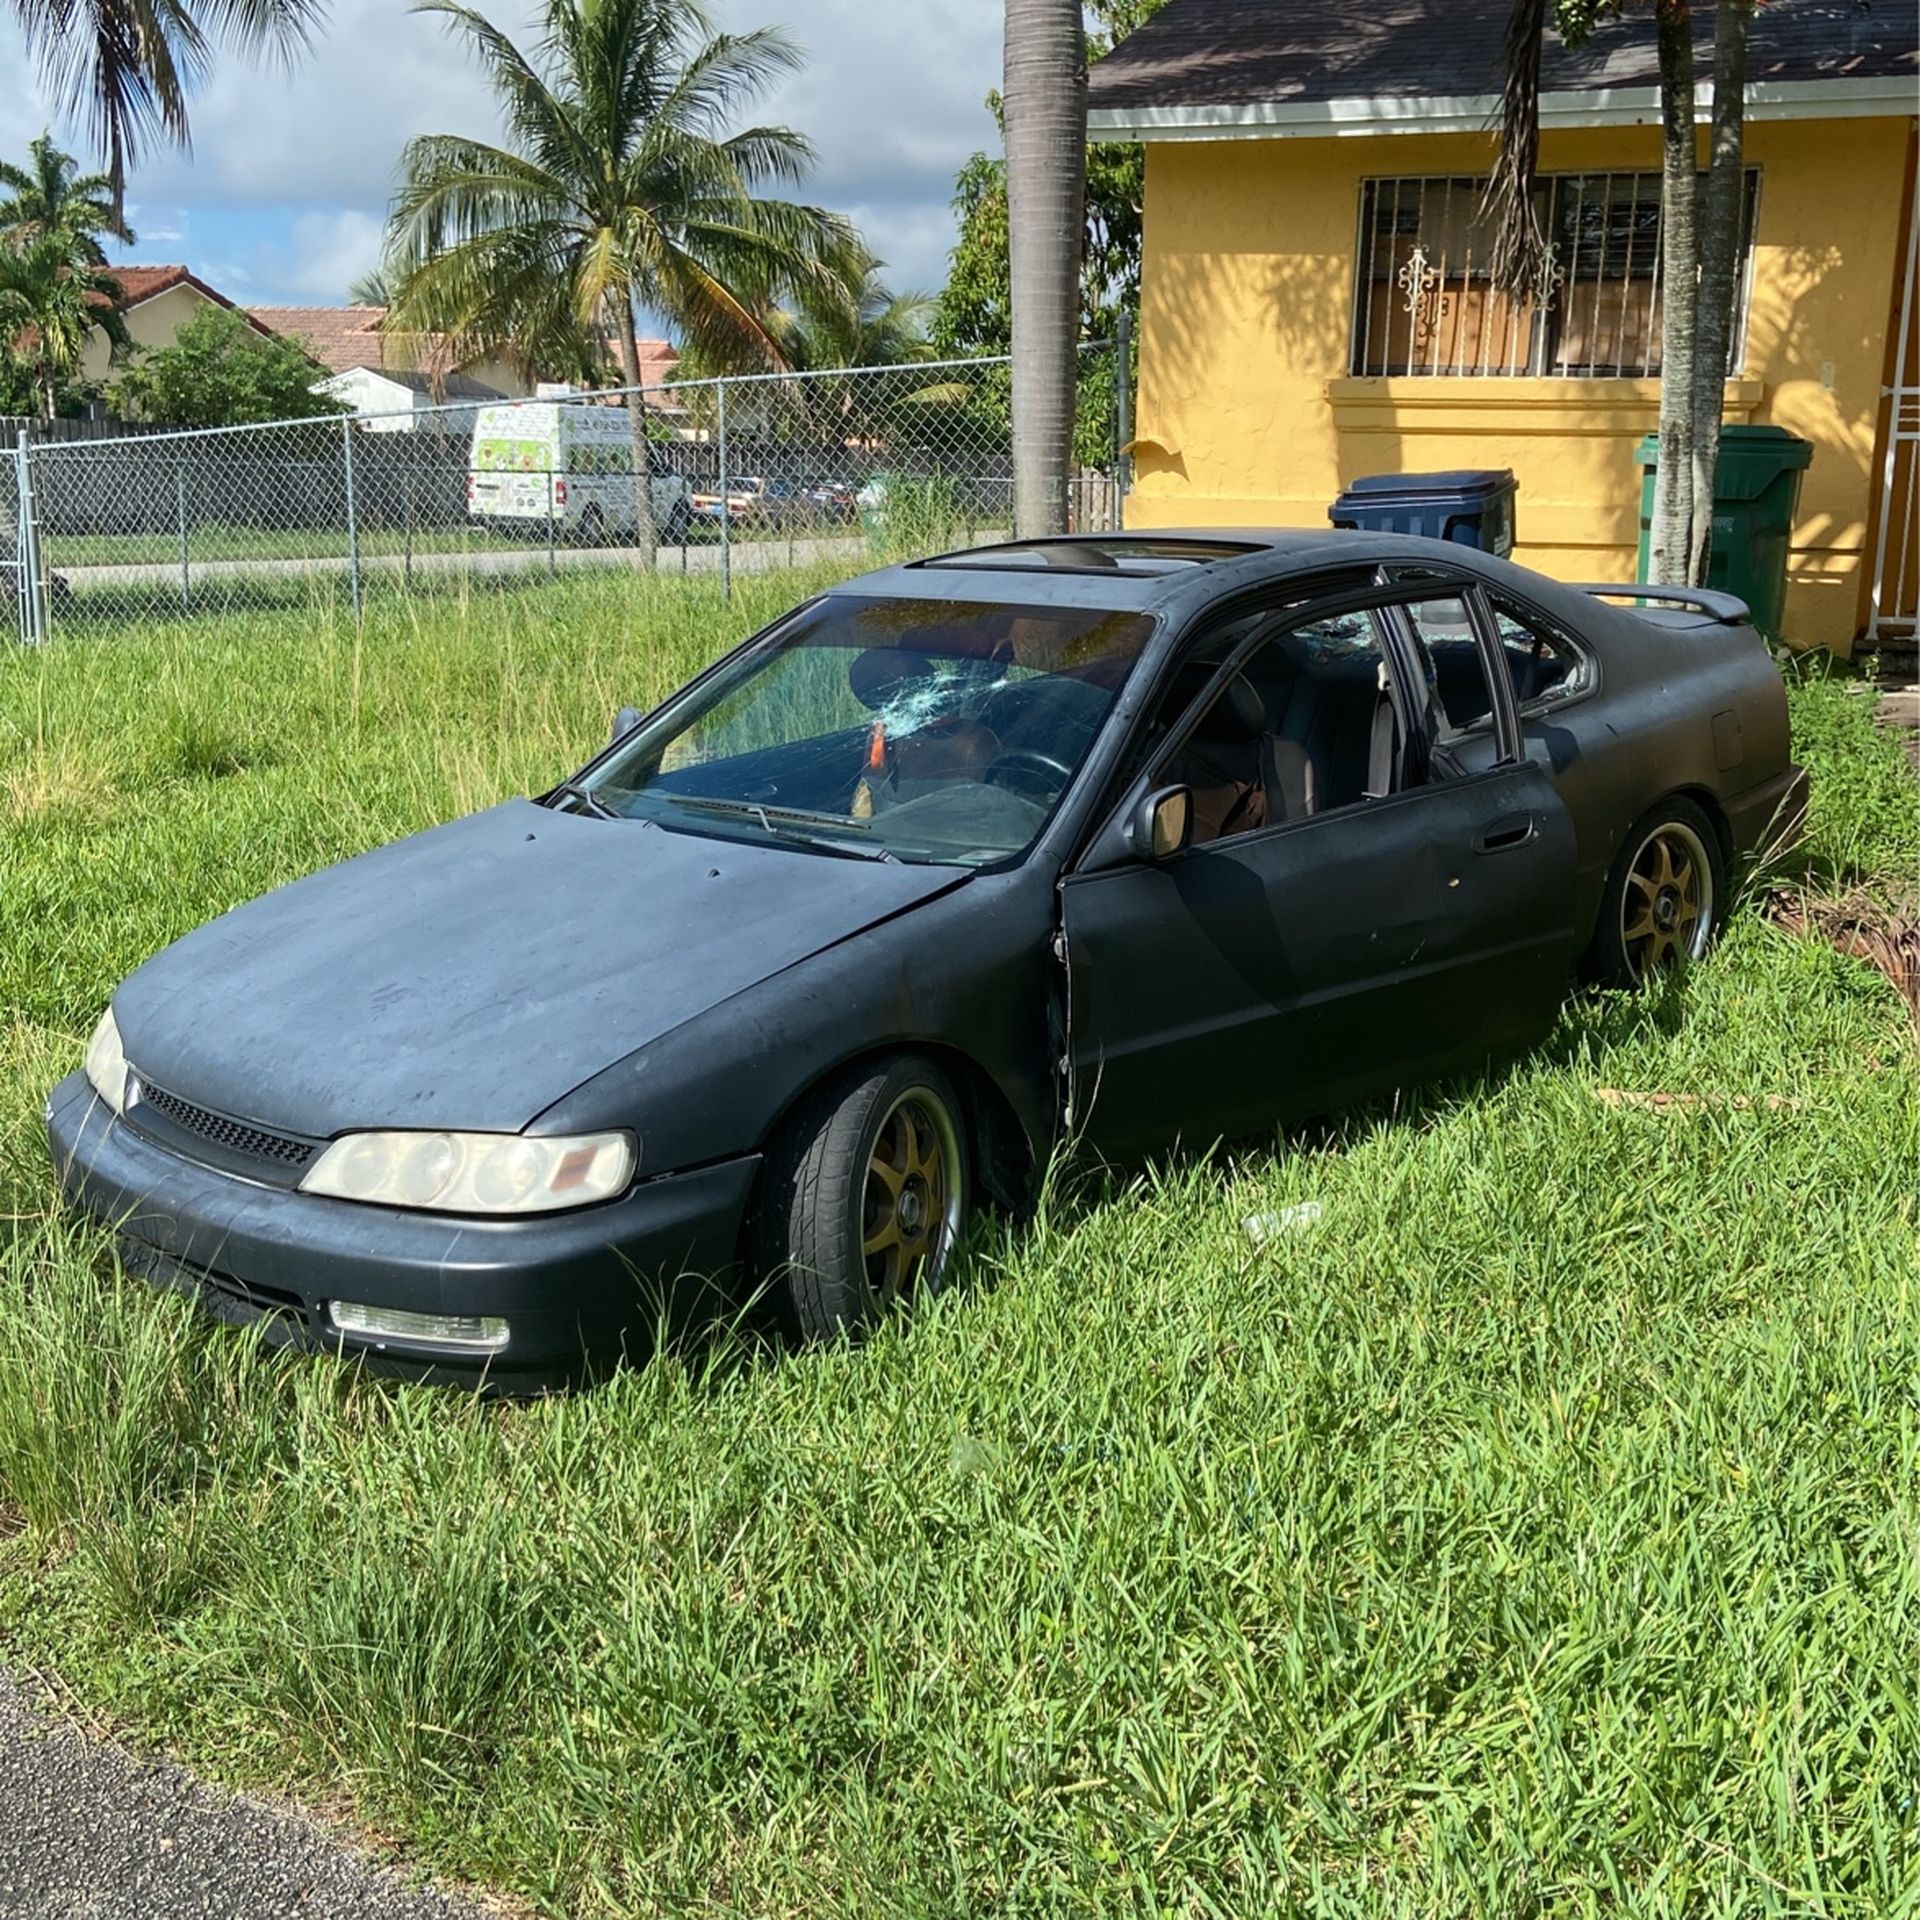 Selling As Is Honda Accord 1996 Parts Car Also  